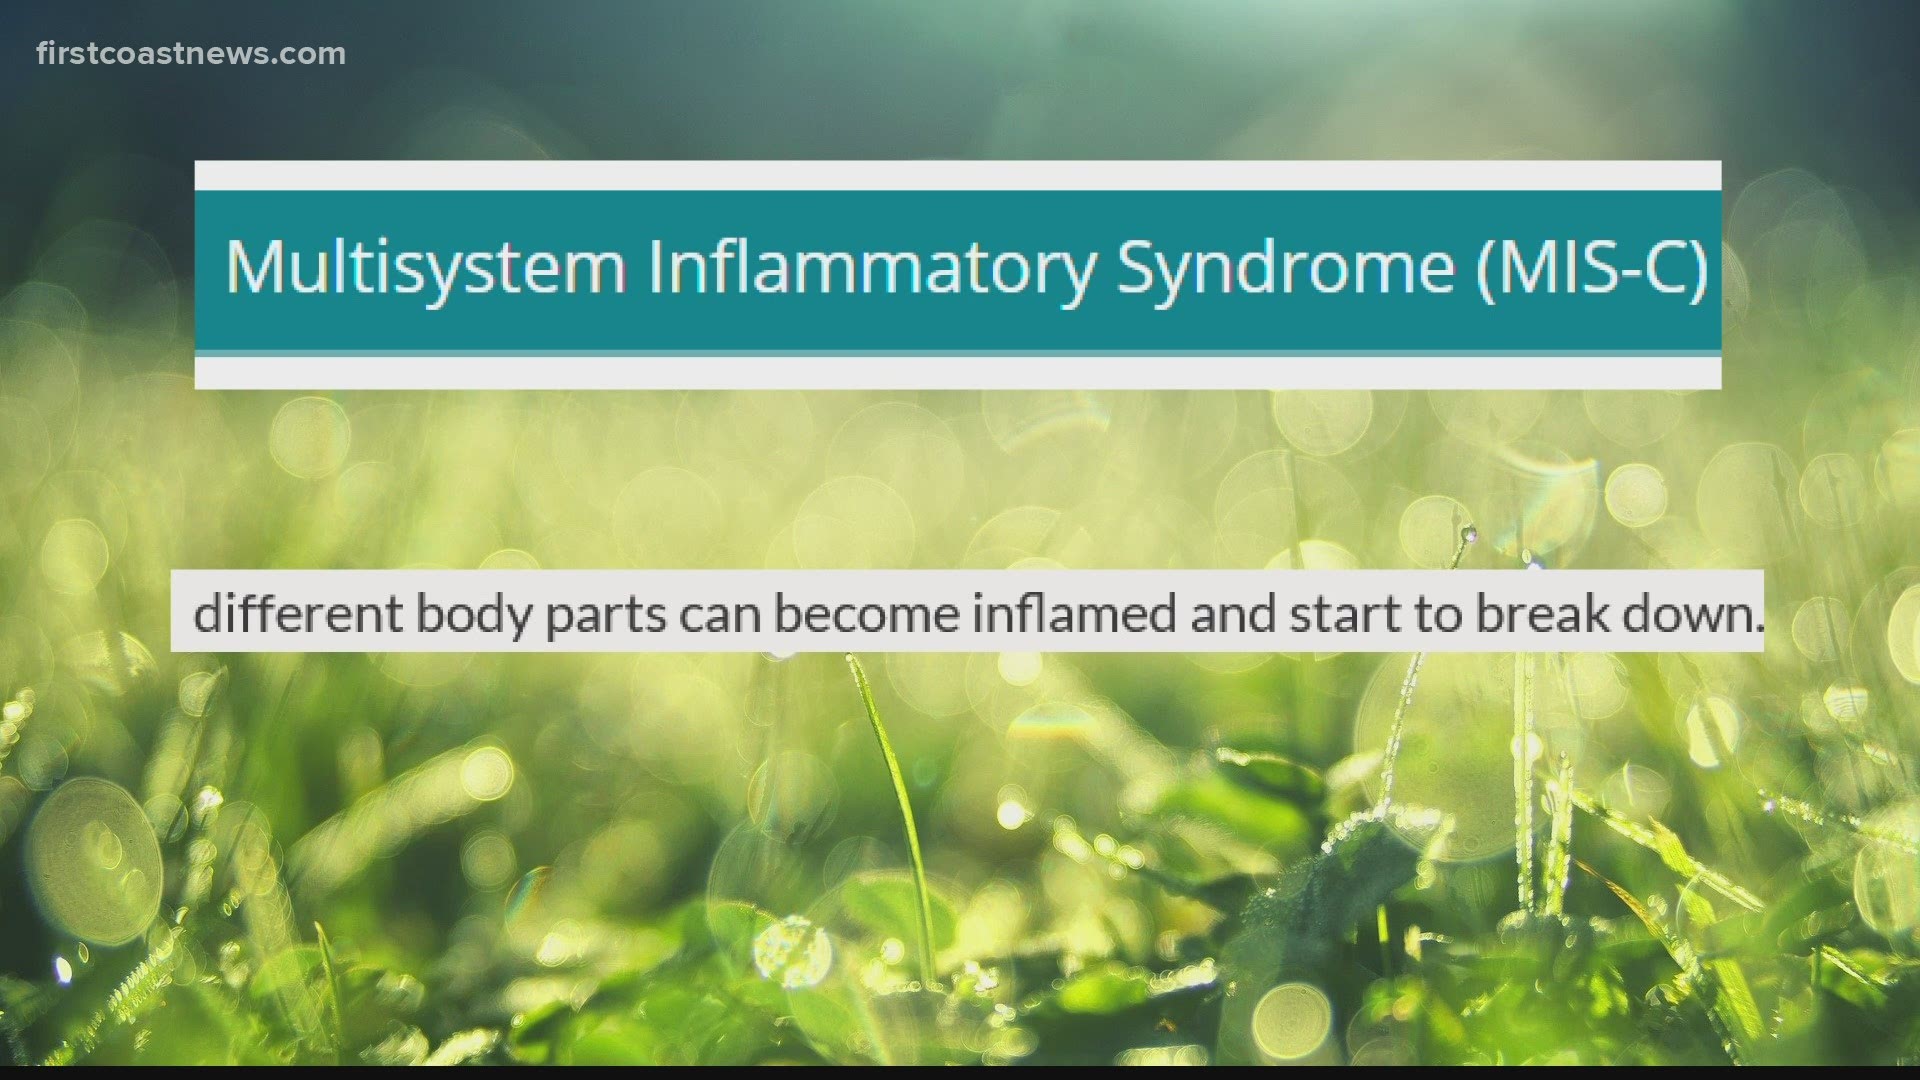 MIS-C is a disorder where different body parts can become inflamed and start to break down.